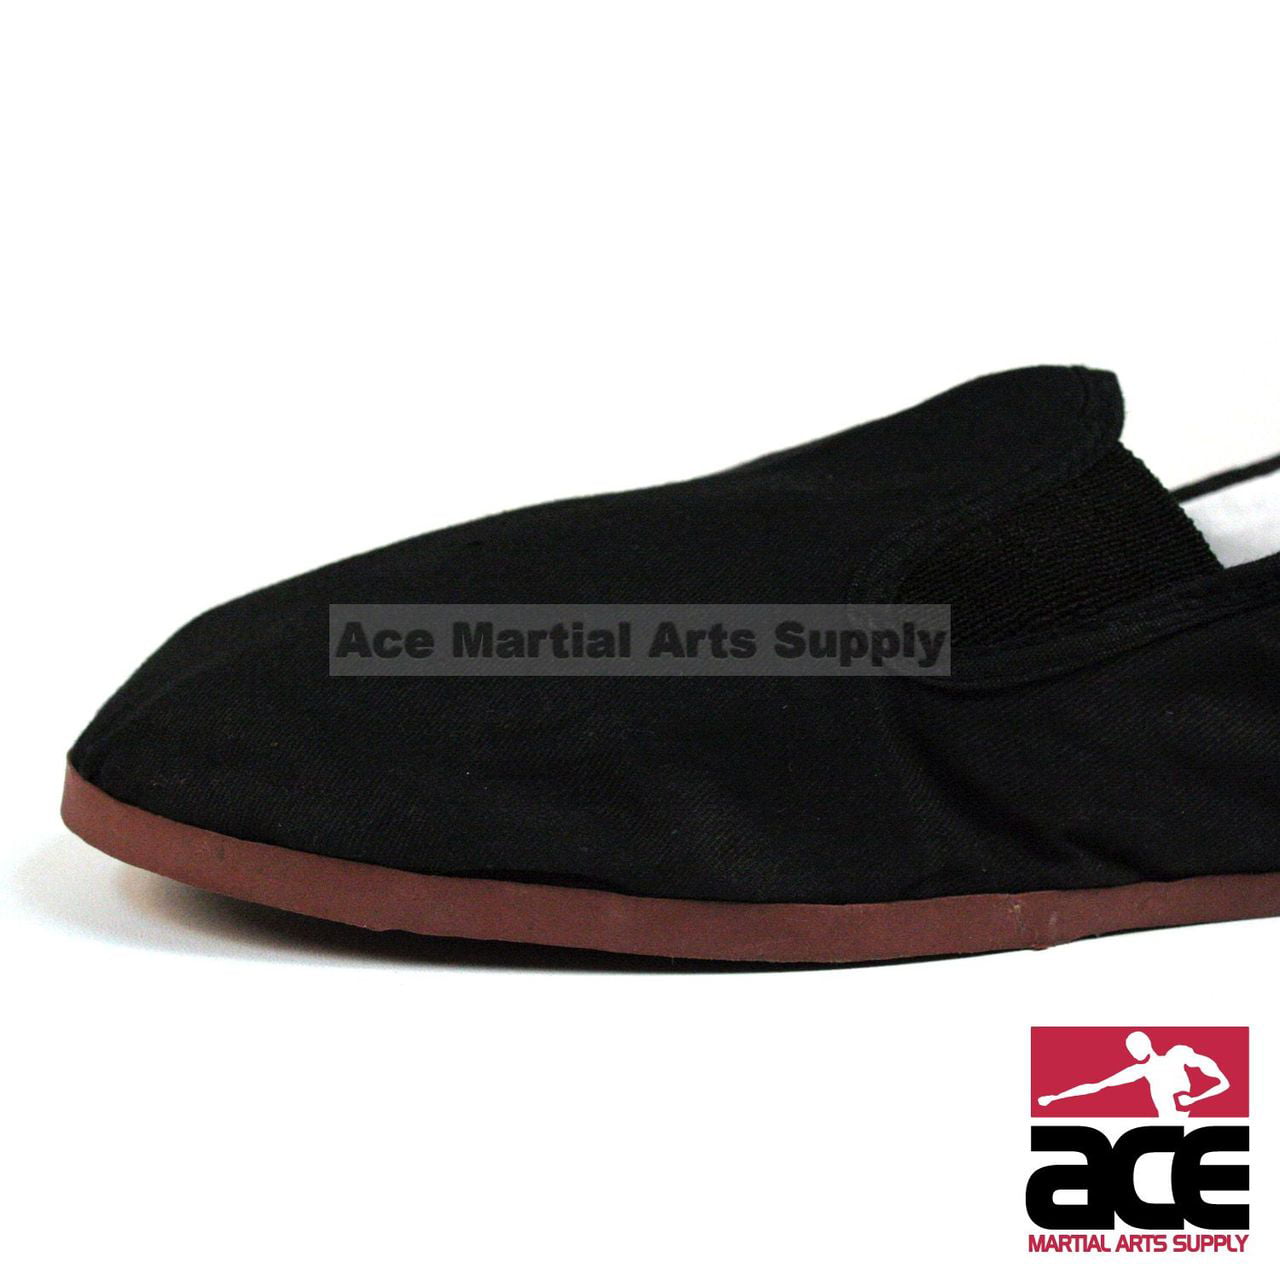 Cotton Sole Brown Rubber Sole and Yellow Bubble Gum Sole Ace Martial Arts Supply Kung Fu Closed Toe Slip On Shoes 